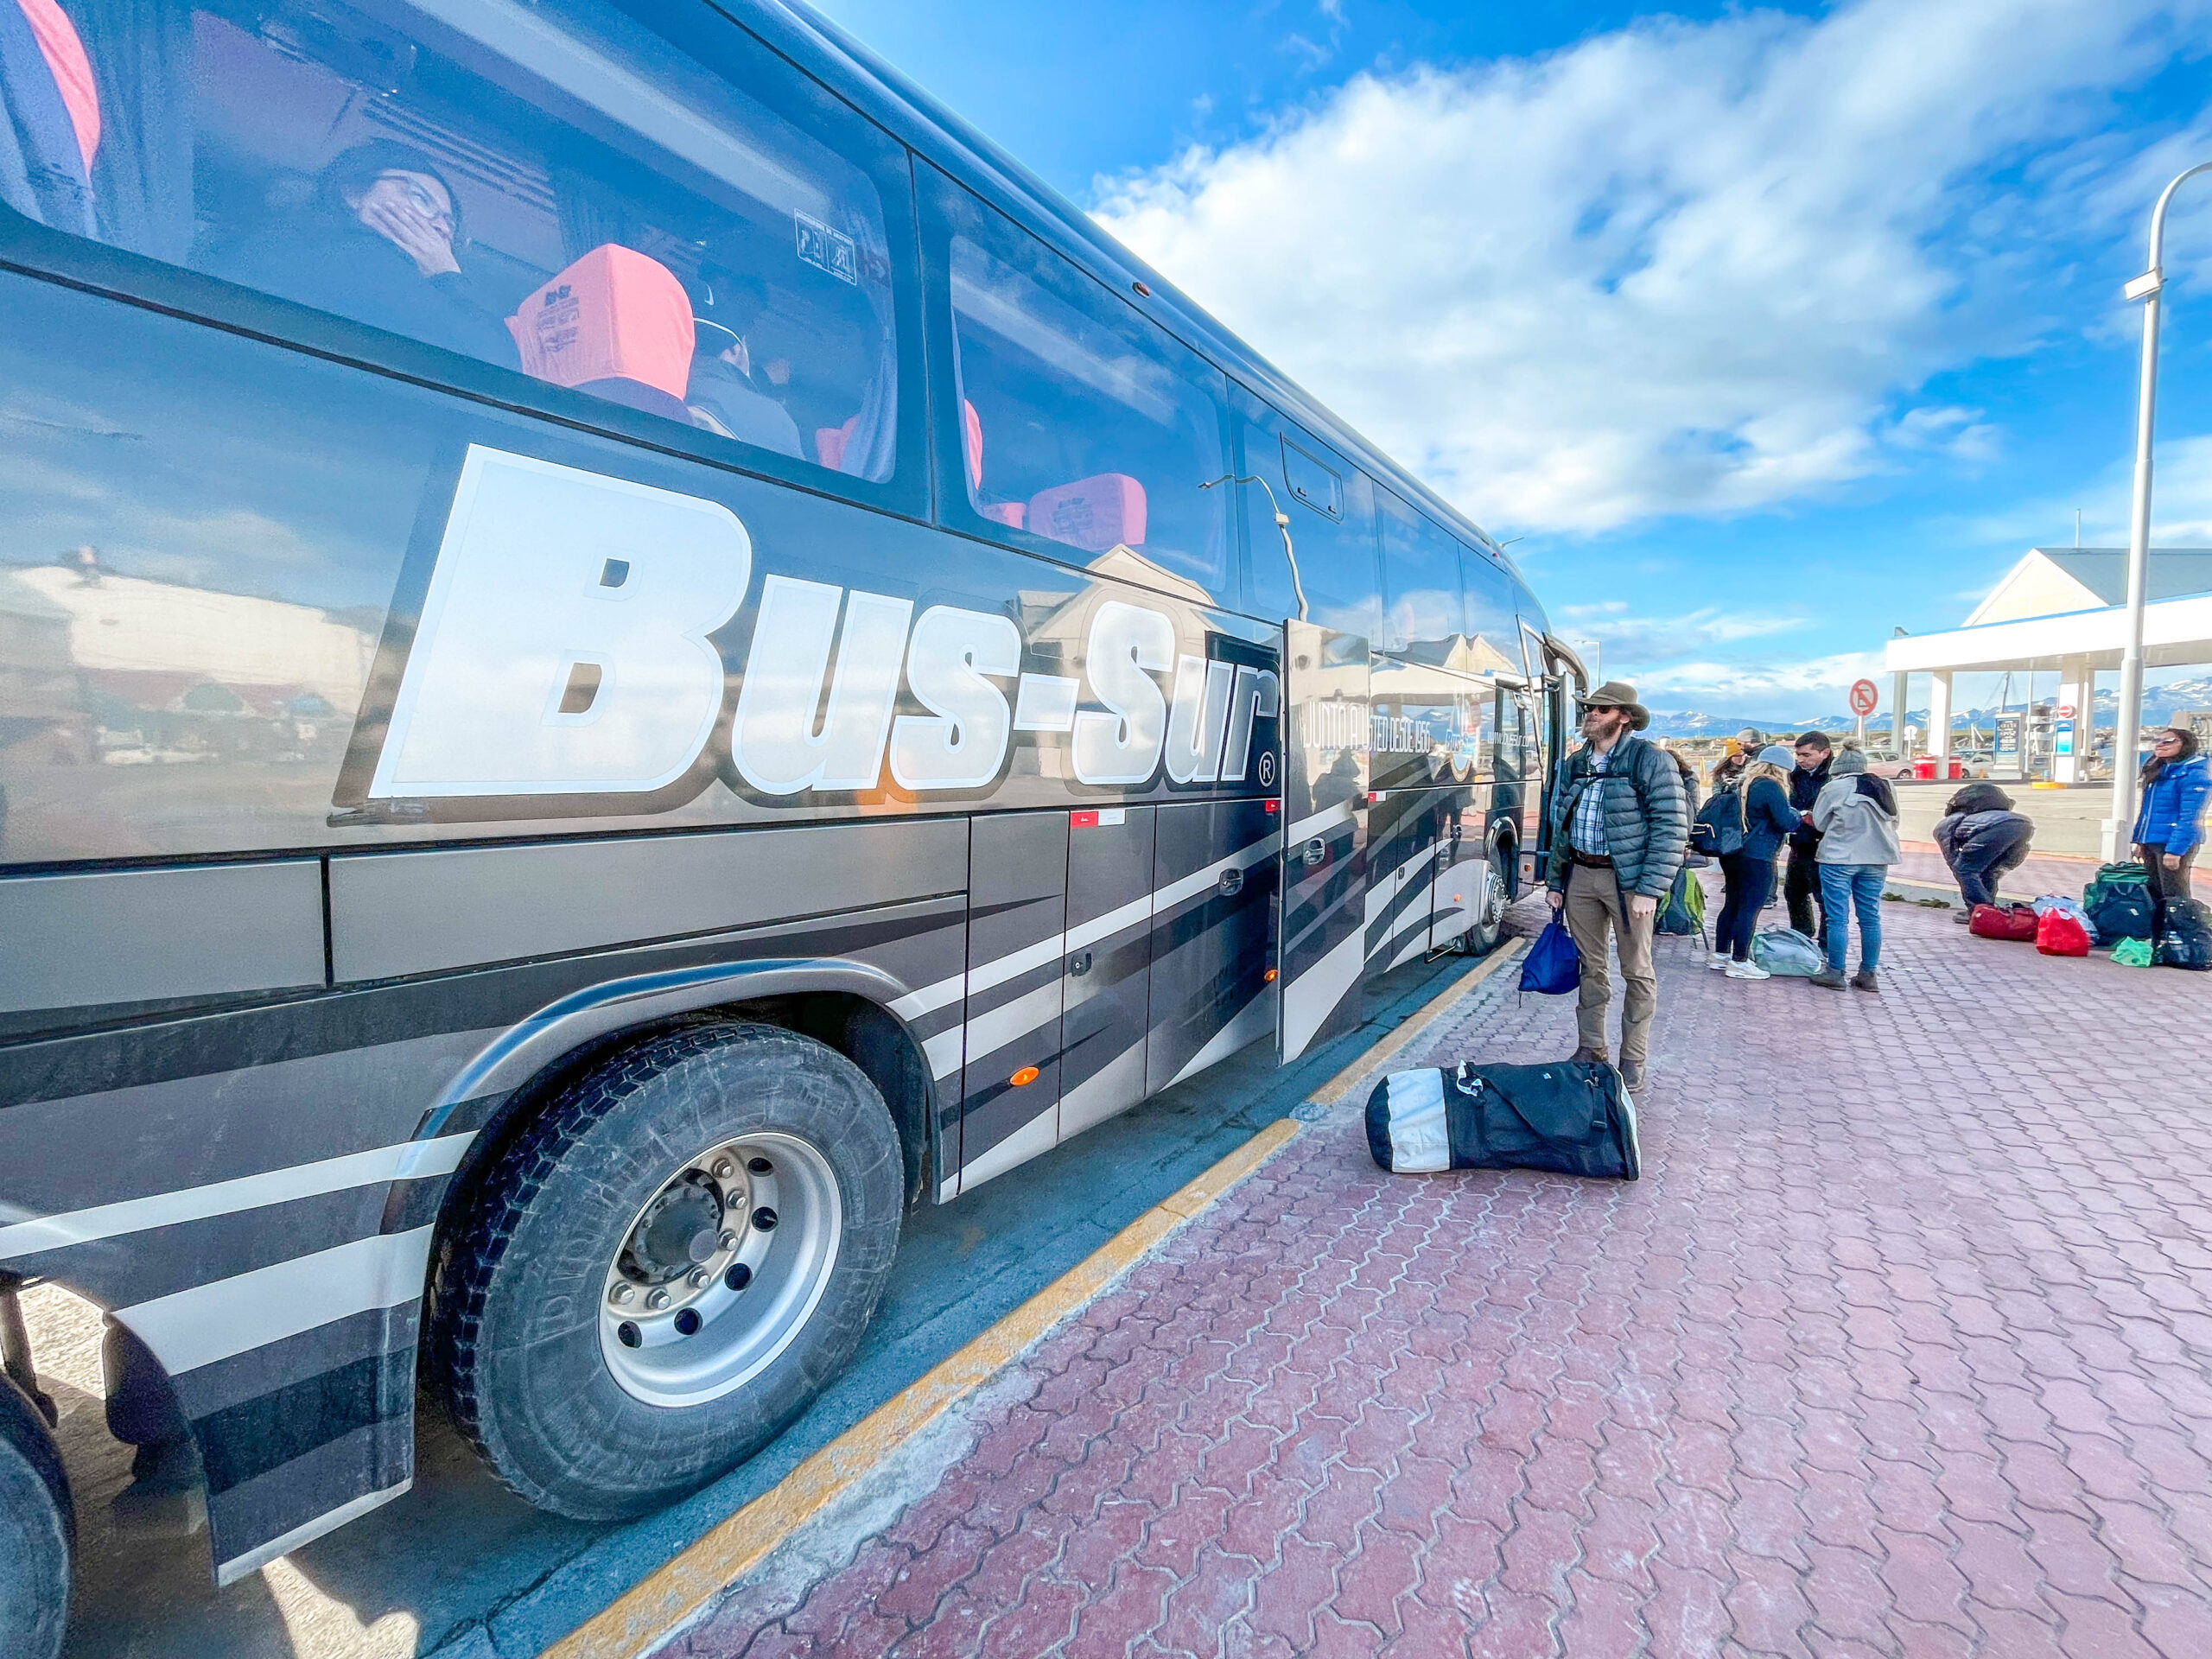 How to get from Ushuaia, Argentina, to Puerto Natales, Chile: A Review of Bus-Sur